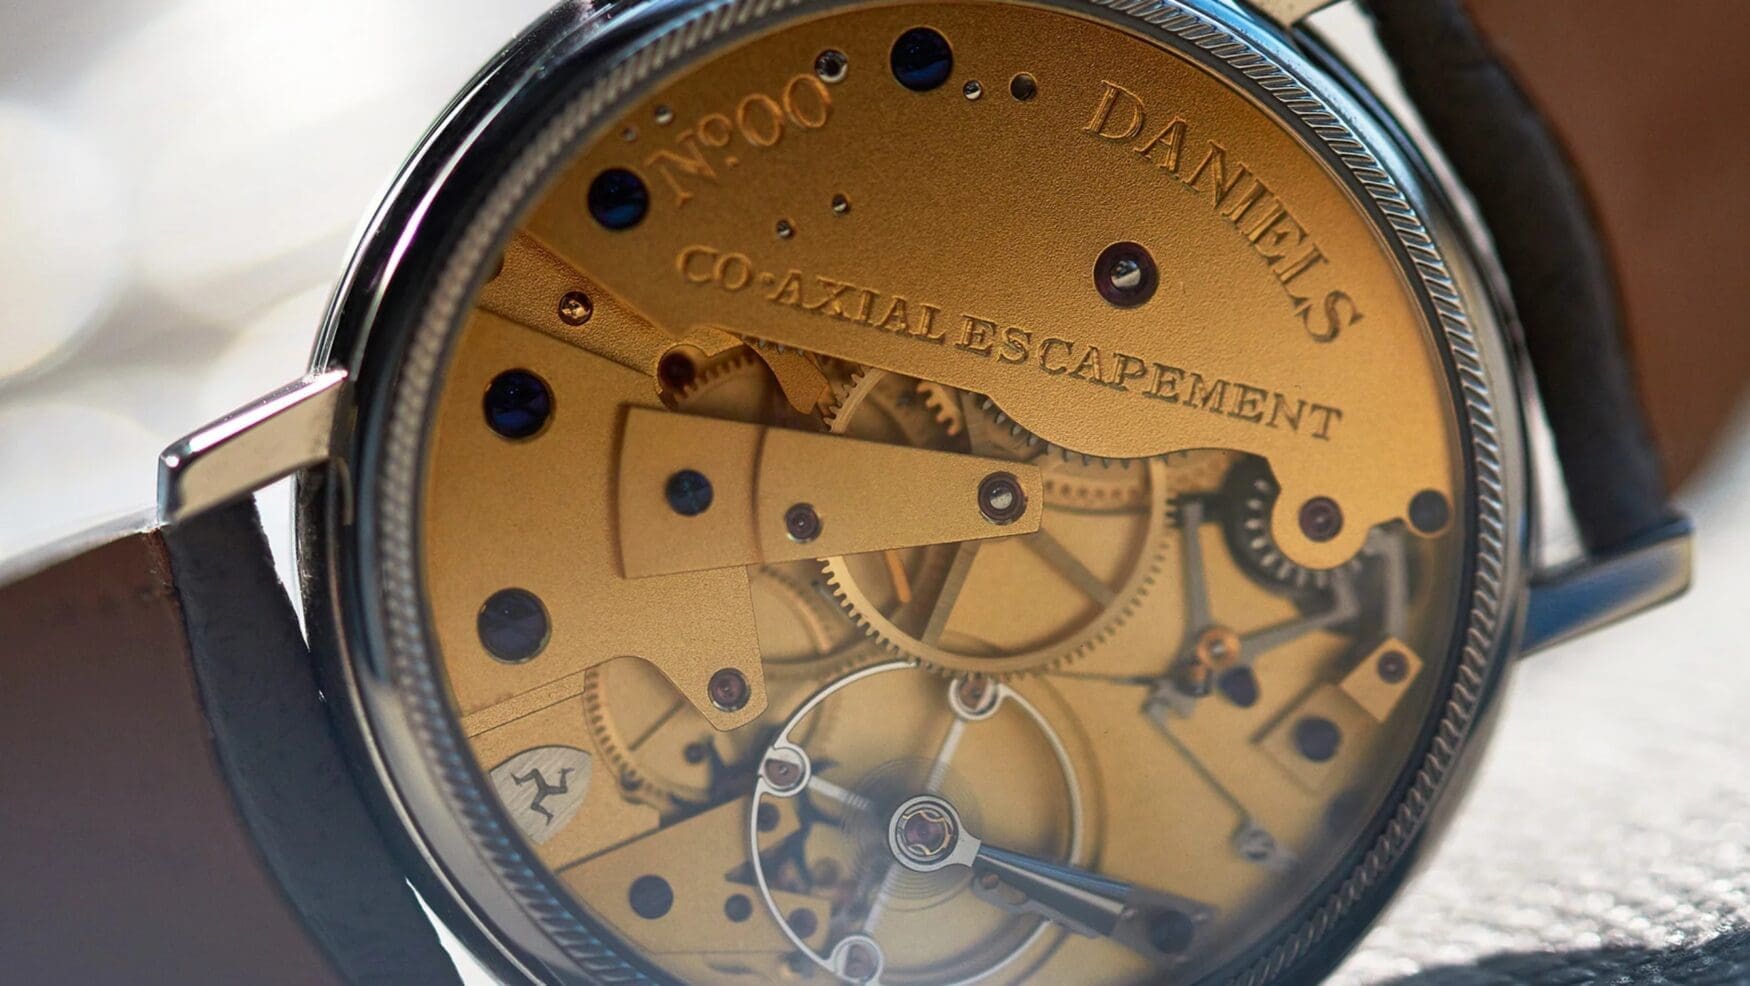 WHAT IF… Breguet were also able to use the co-axial escapement?